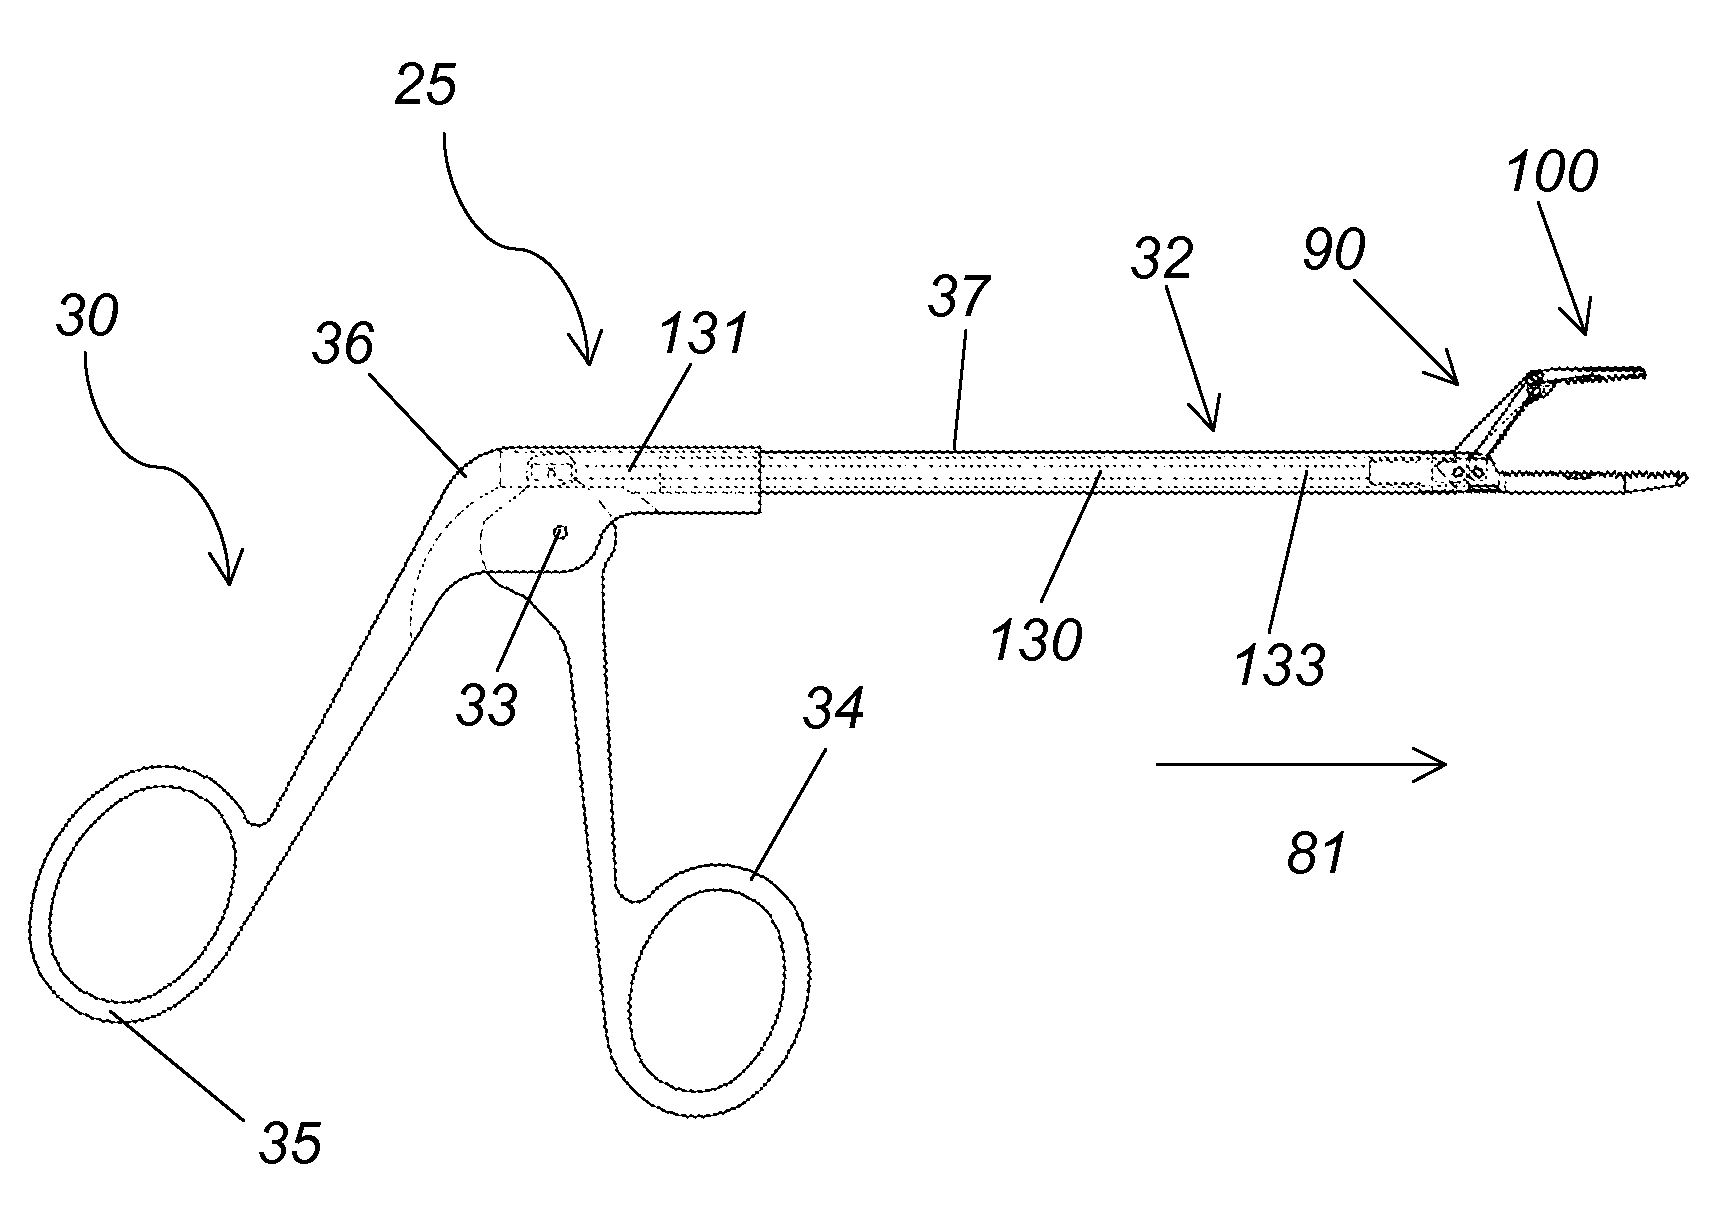 End effector mechanism for a surgical instrument